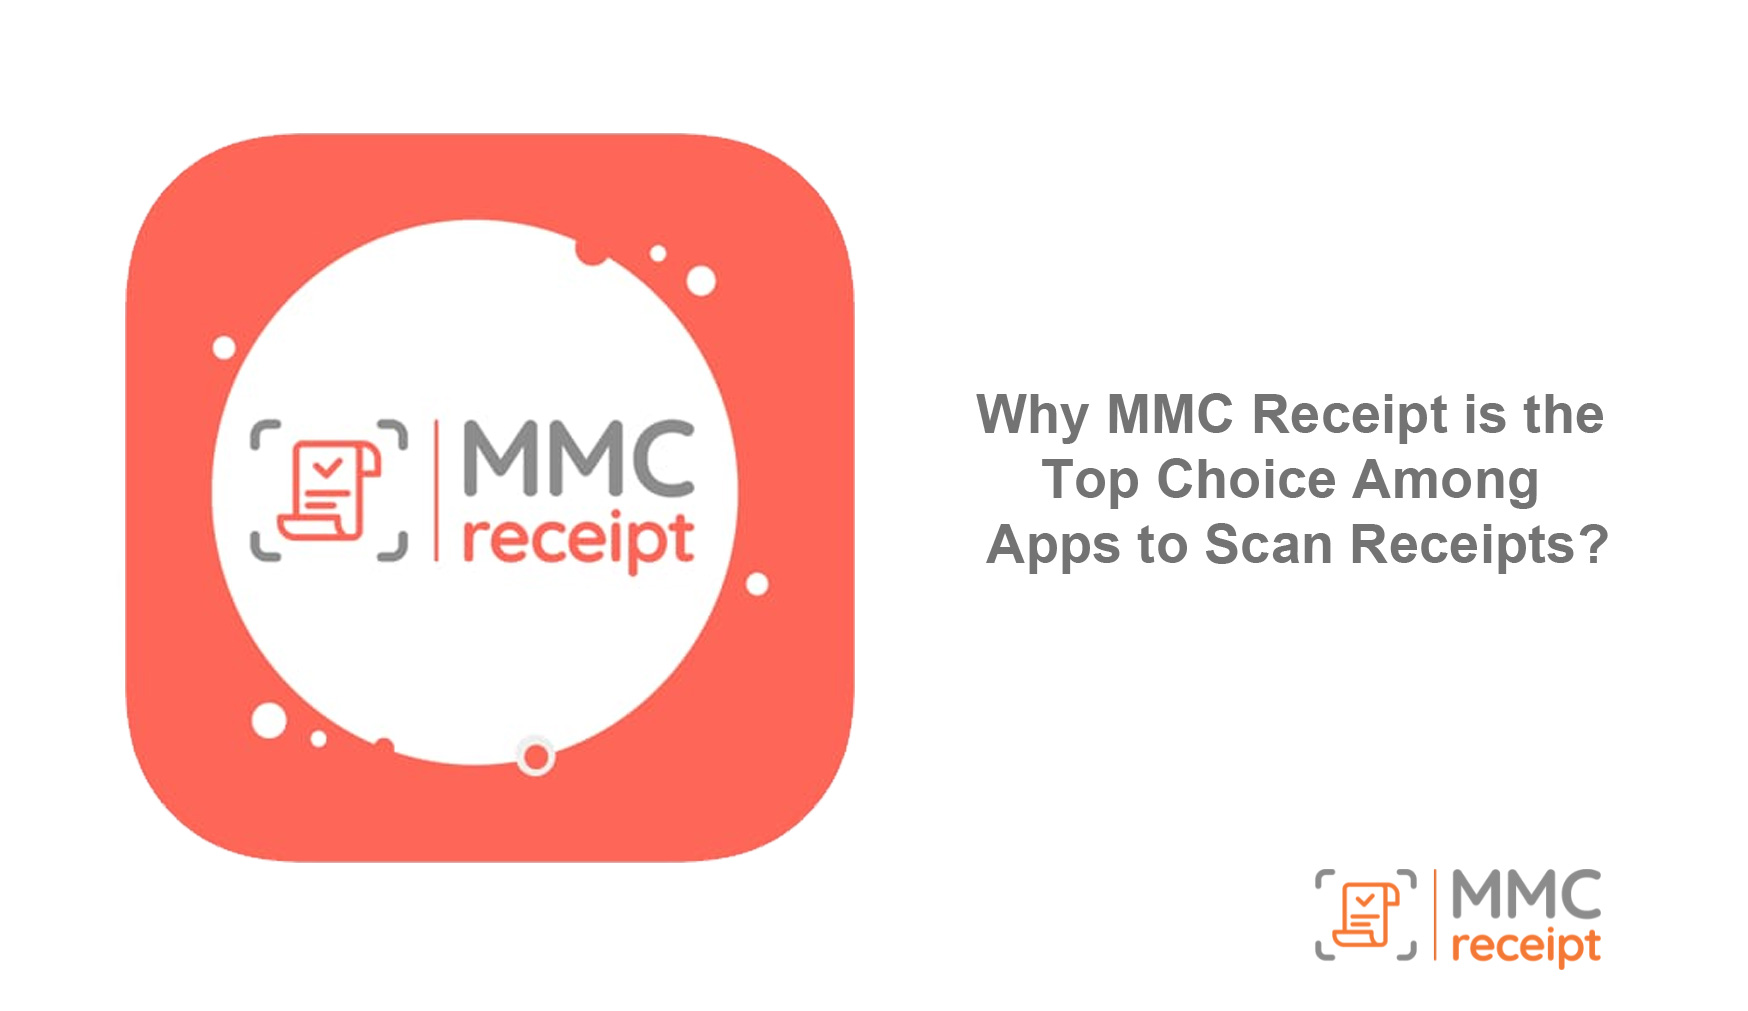 Why MMC Receipt is the Top Choice Among Apps to Scan Receipts?